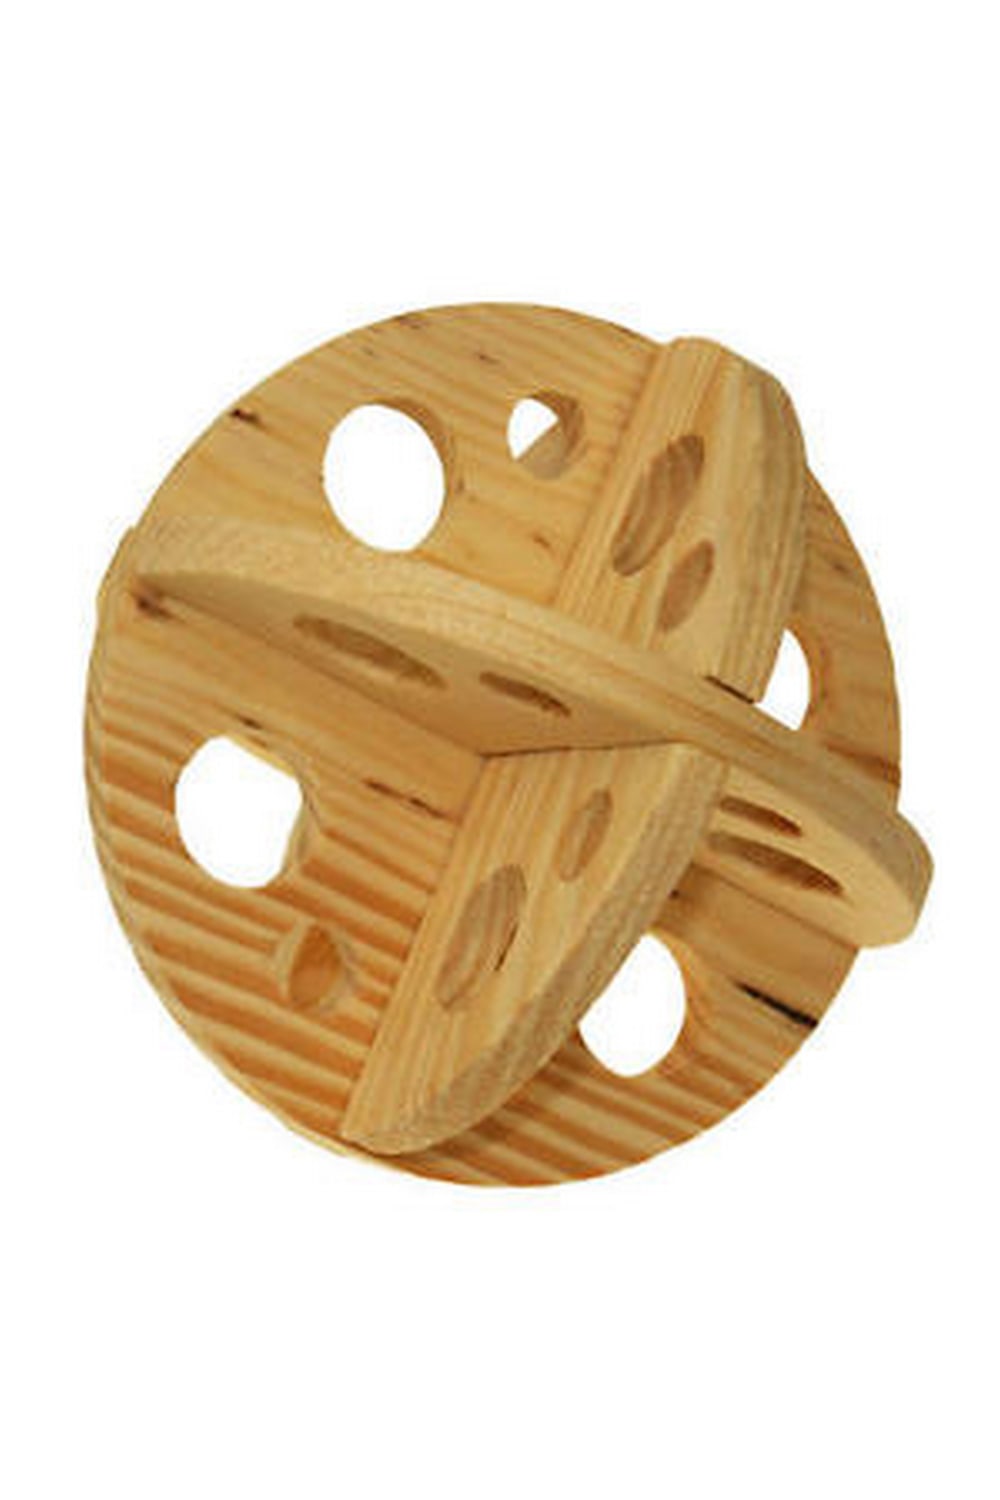 Ancol Wooden Roll N Chew Ball